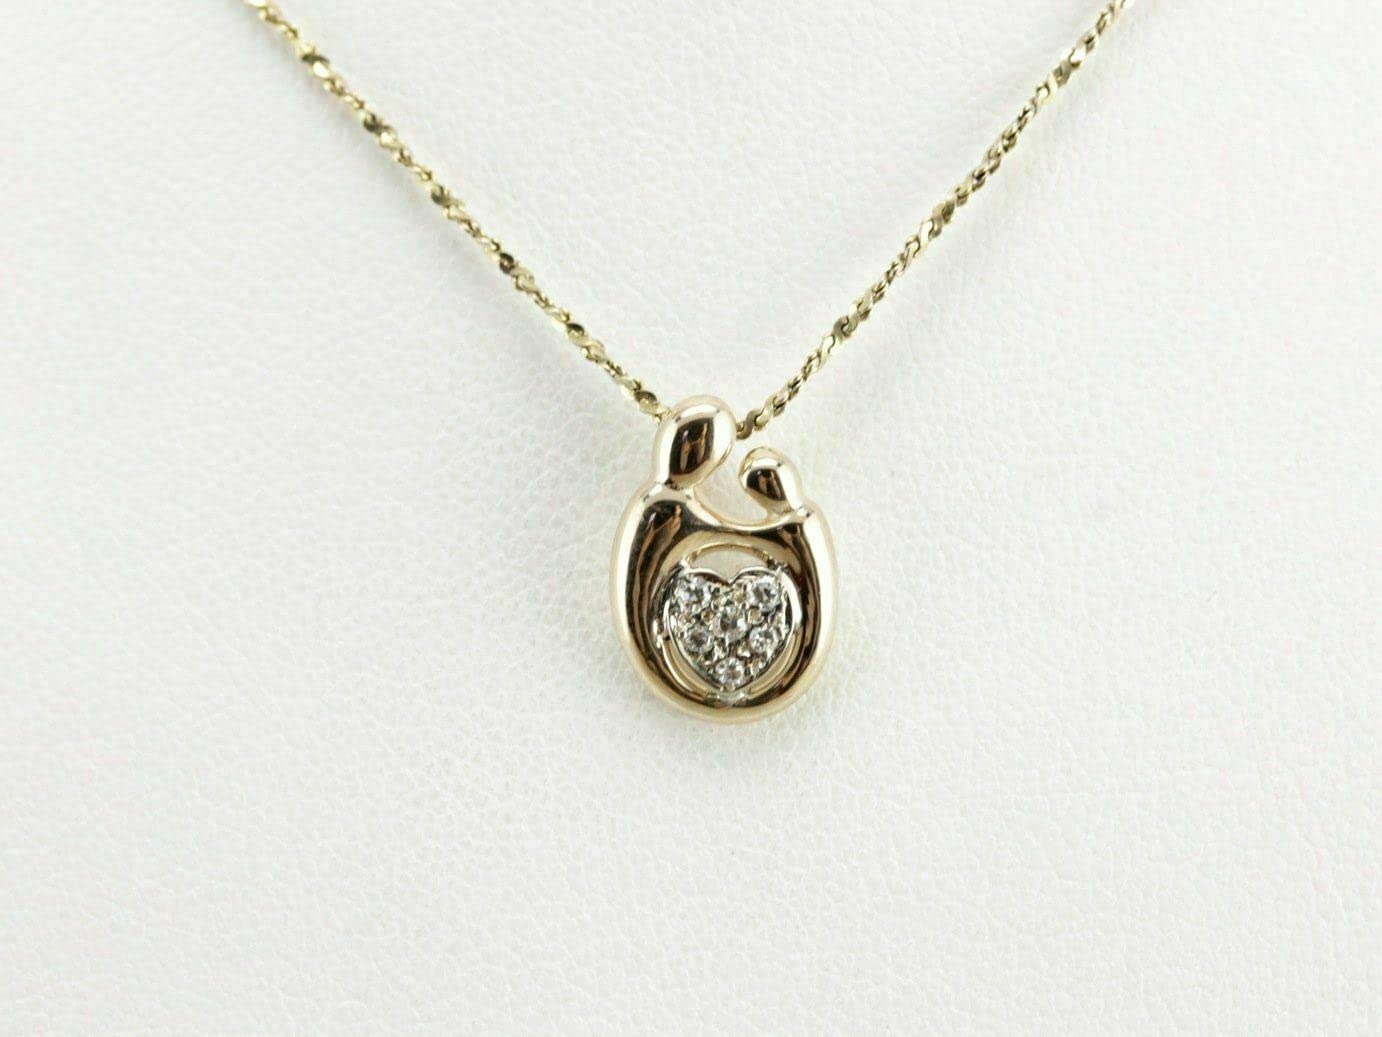 1/4 CT Round Cut Prong Set VVS1 Diamond Mother Child Love Heart Pendant Necklace 14K Yellow Gold Over Sterling Silver for Mother's Day Free 18